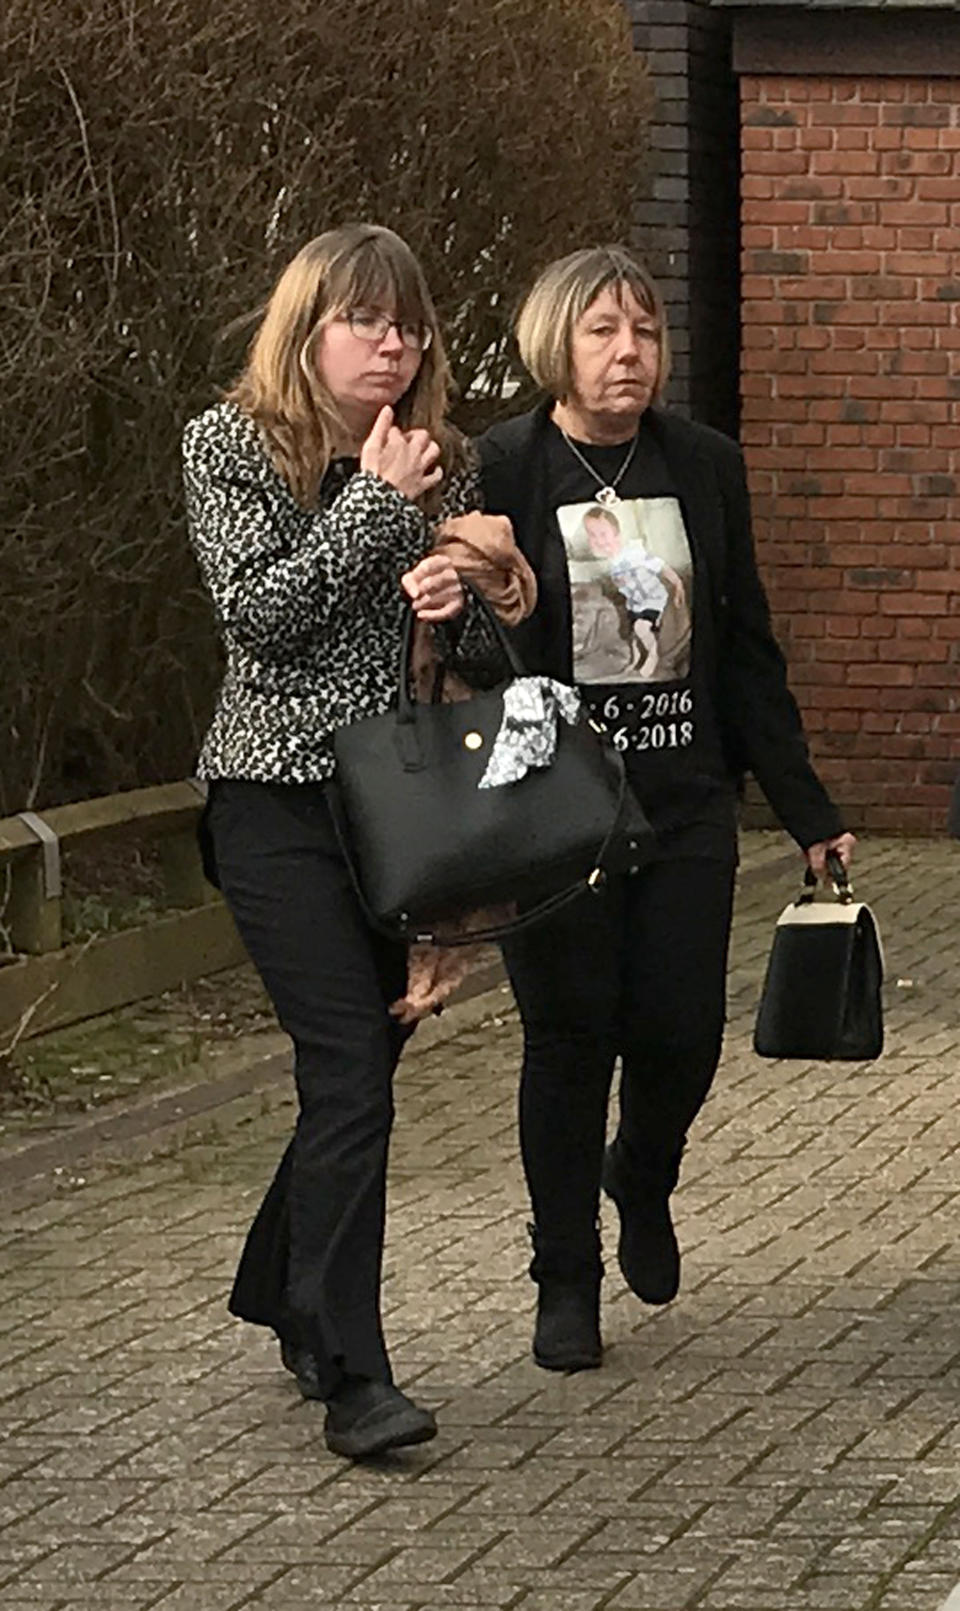 James Manning's mother Natalie Reeves (left) and grandmother Angela Knight at Centenary House in Crawley, West Sussex for the inquest into his death.